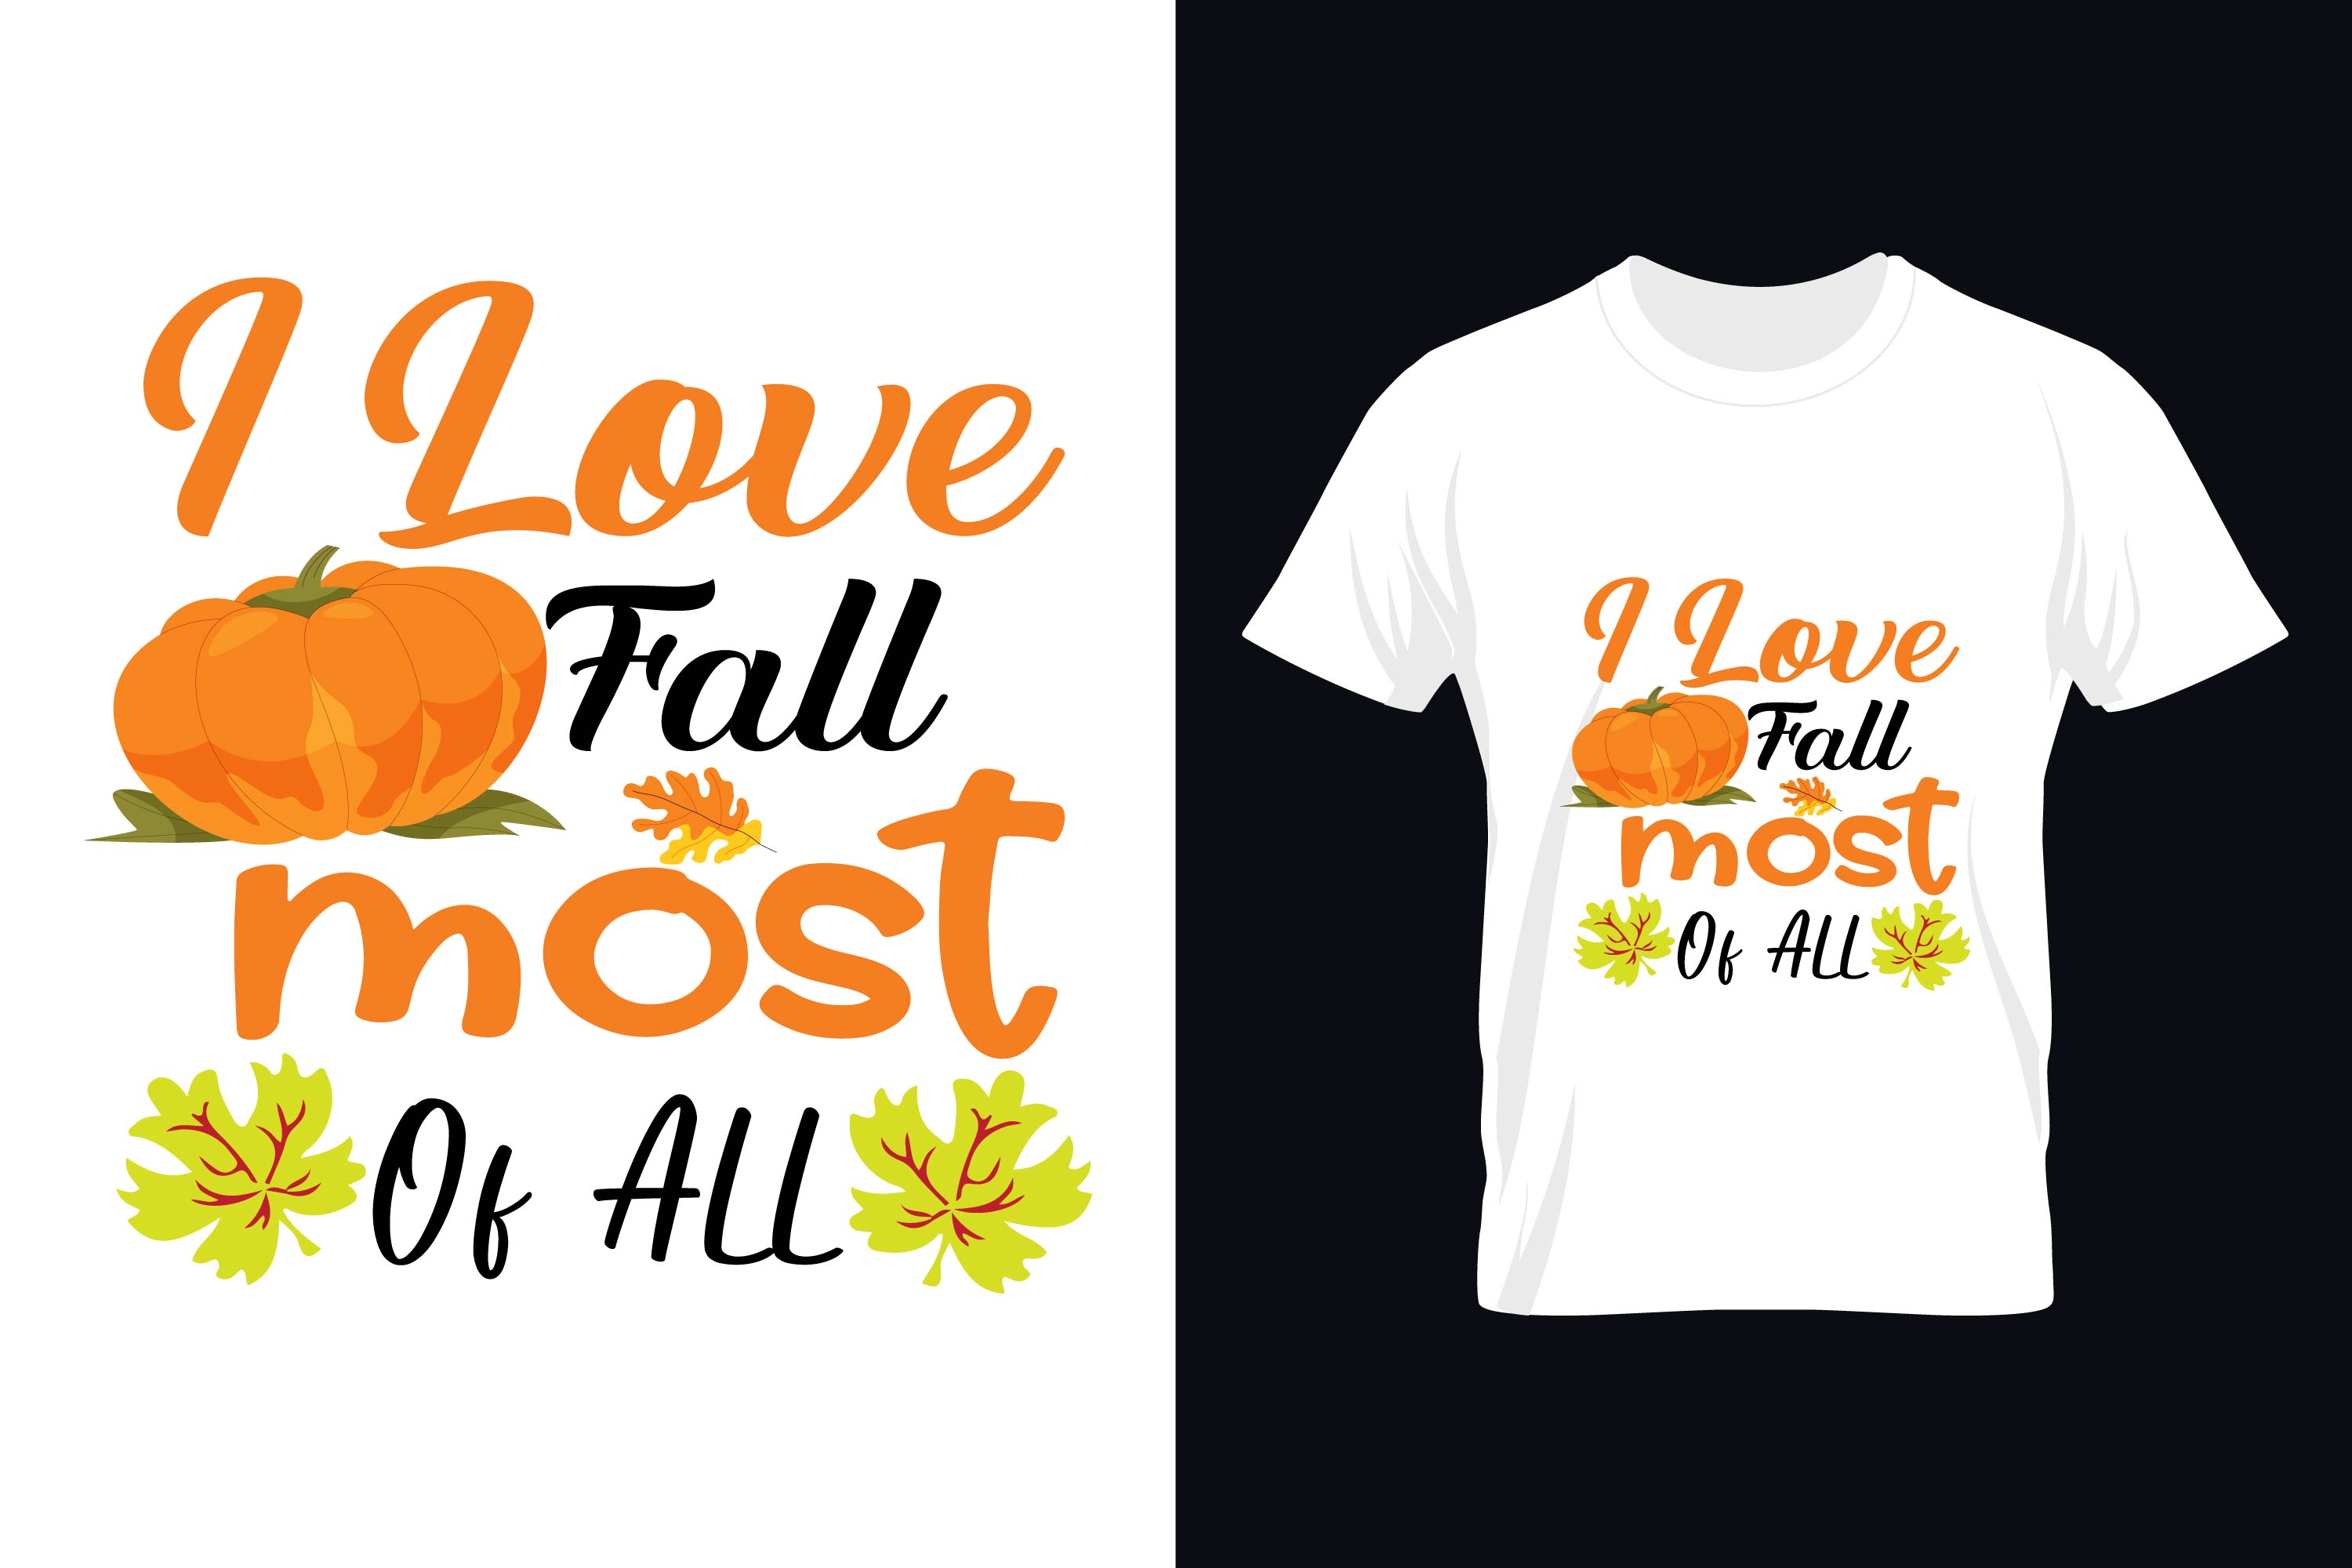 Image of a white t-shirt with a colorful print of a pumpkin and an inscription on the theme of autumn.